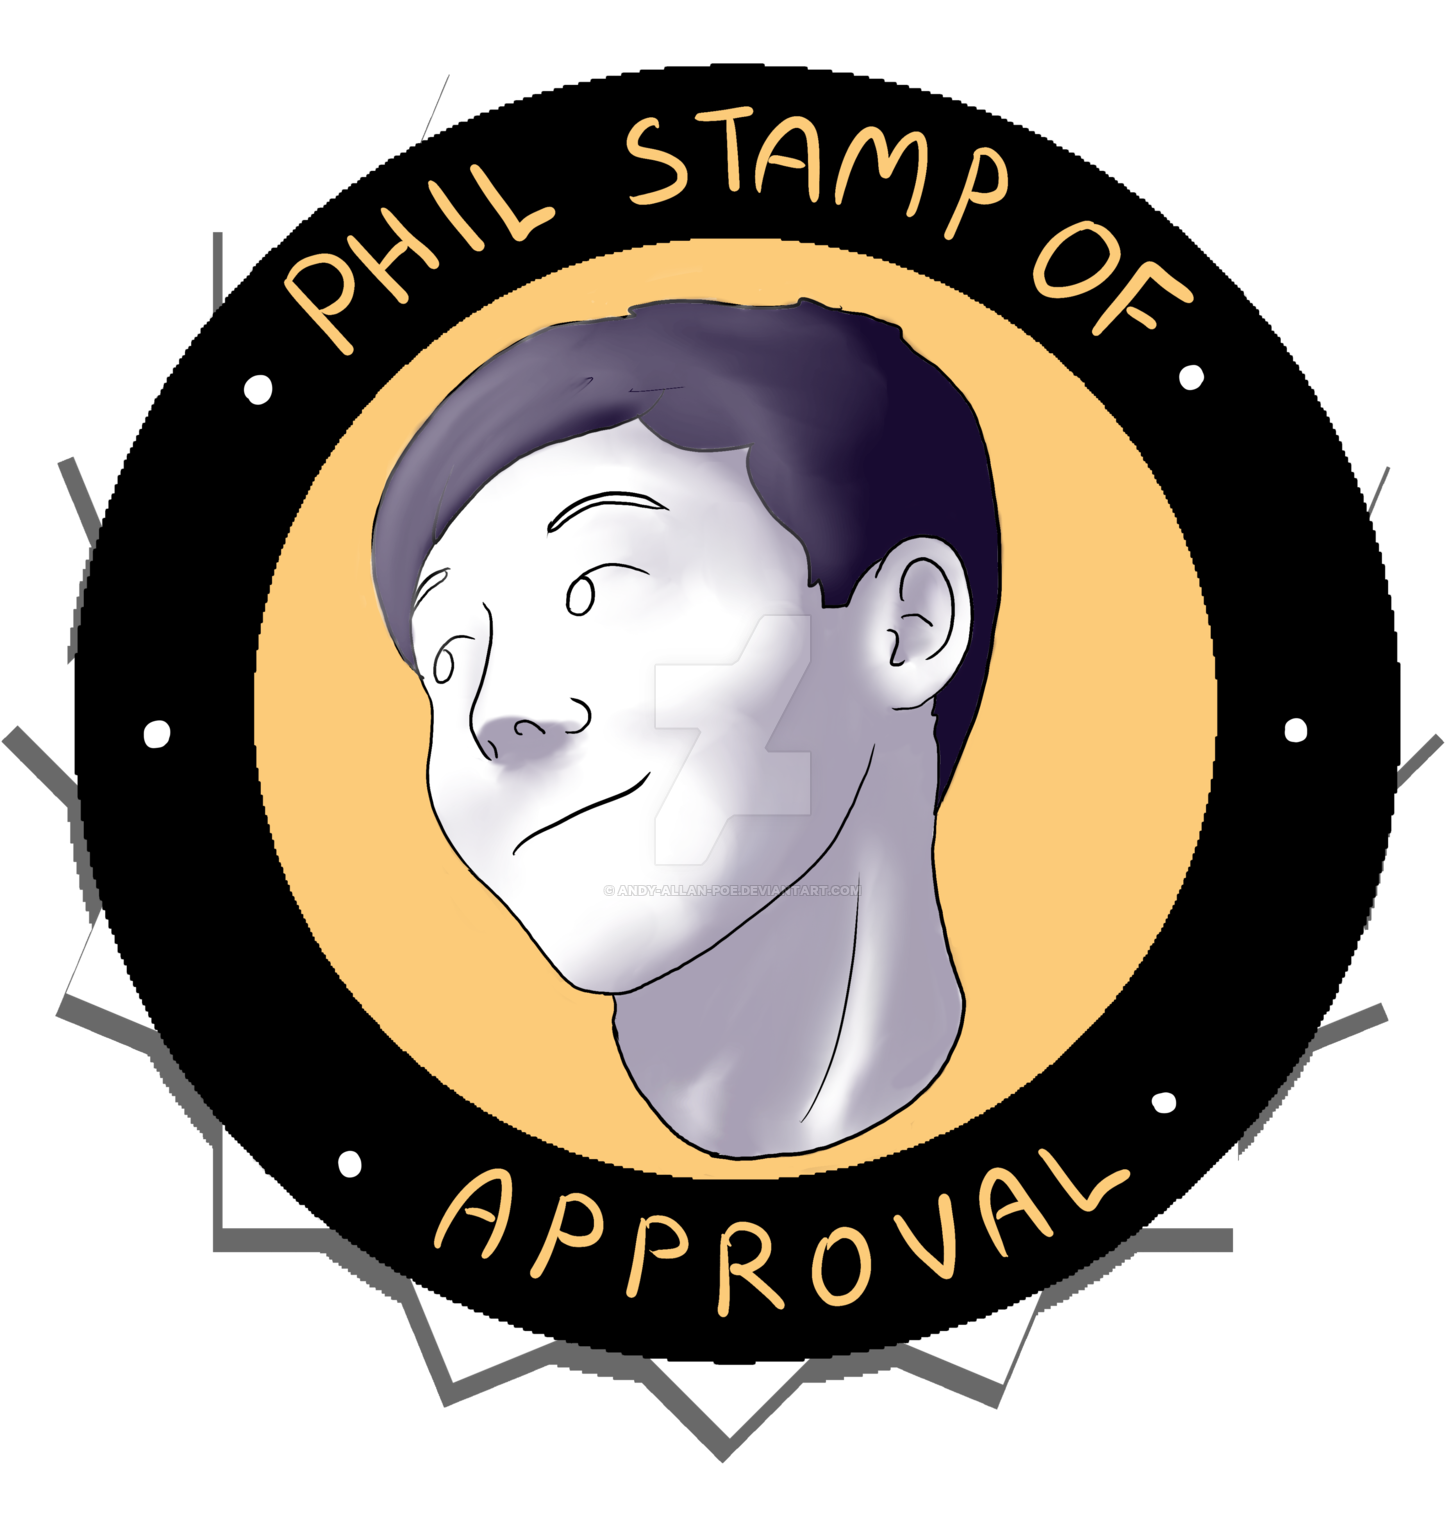 Phil Stamp Of Approval By Andy Allan Poe - Illustration (1600x1600)